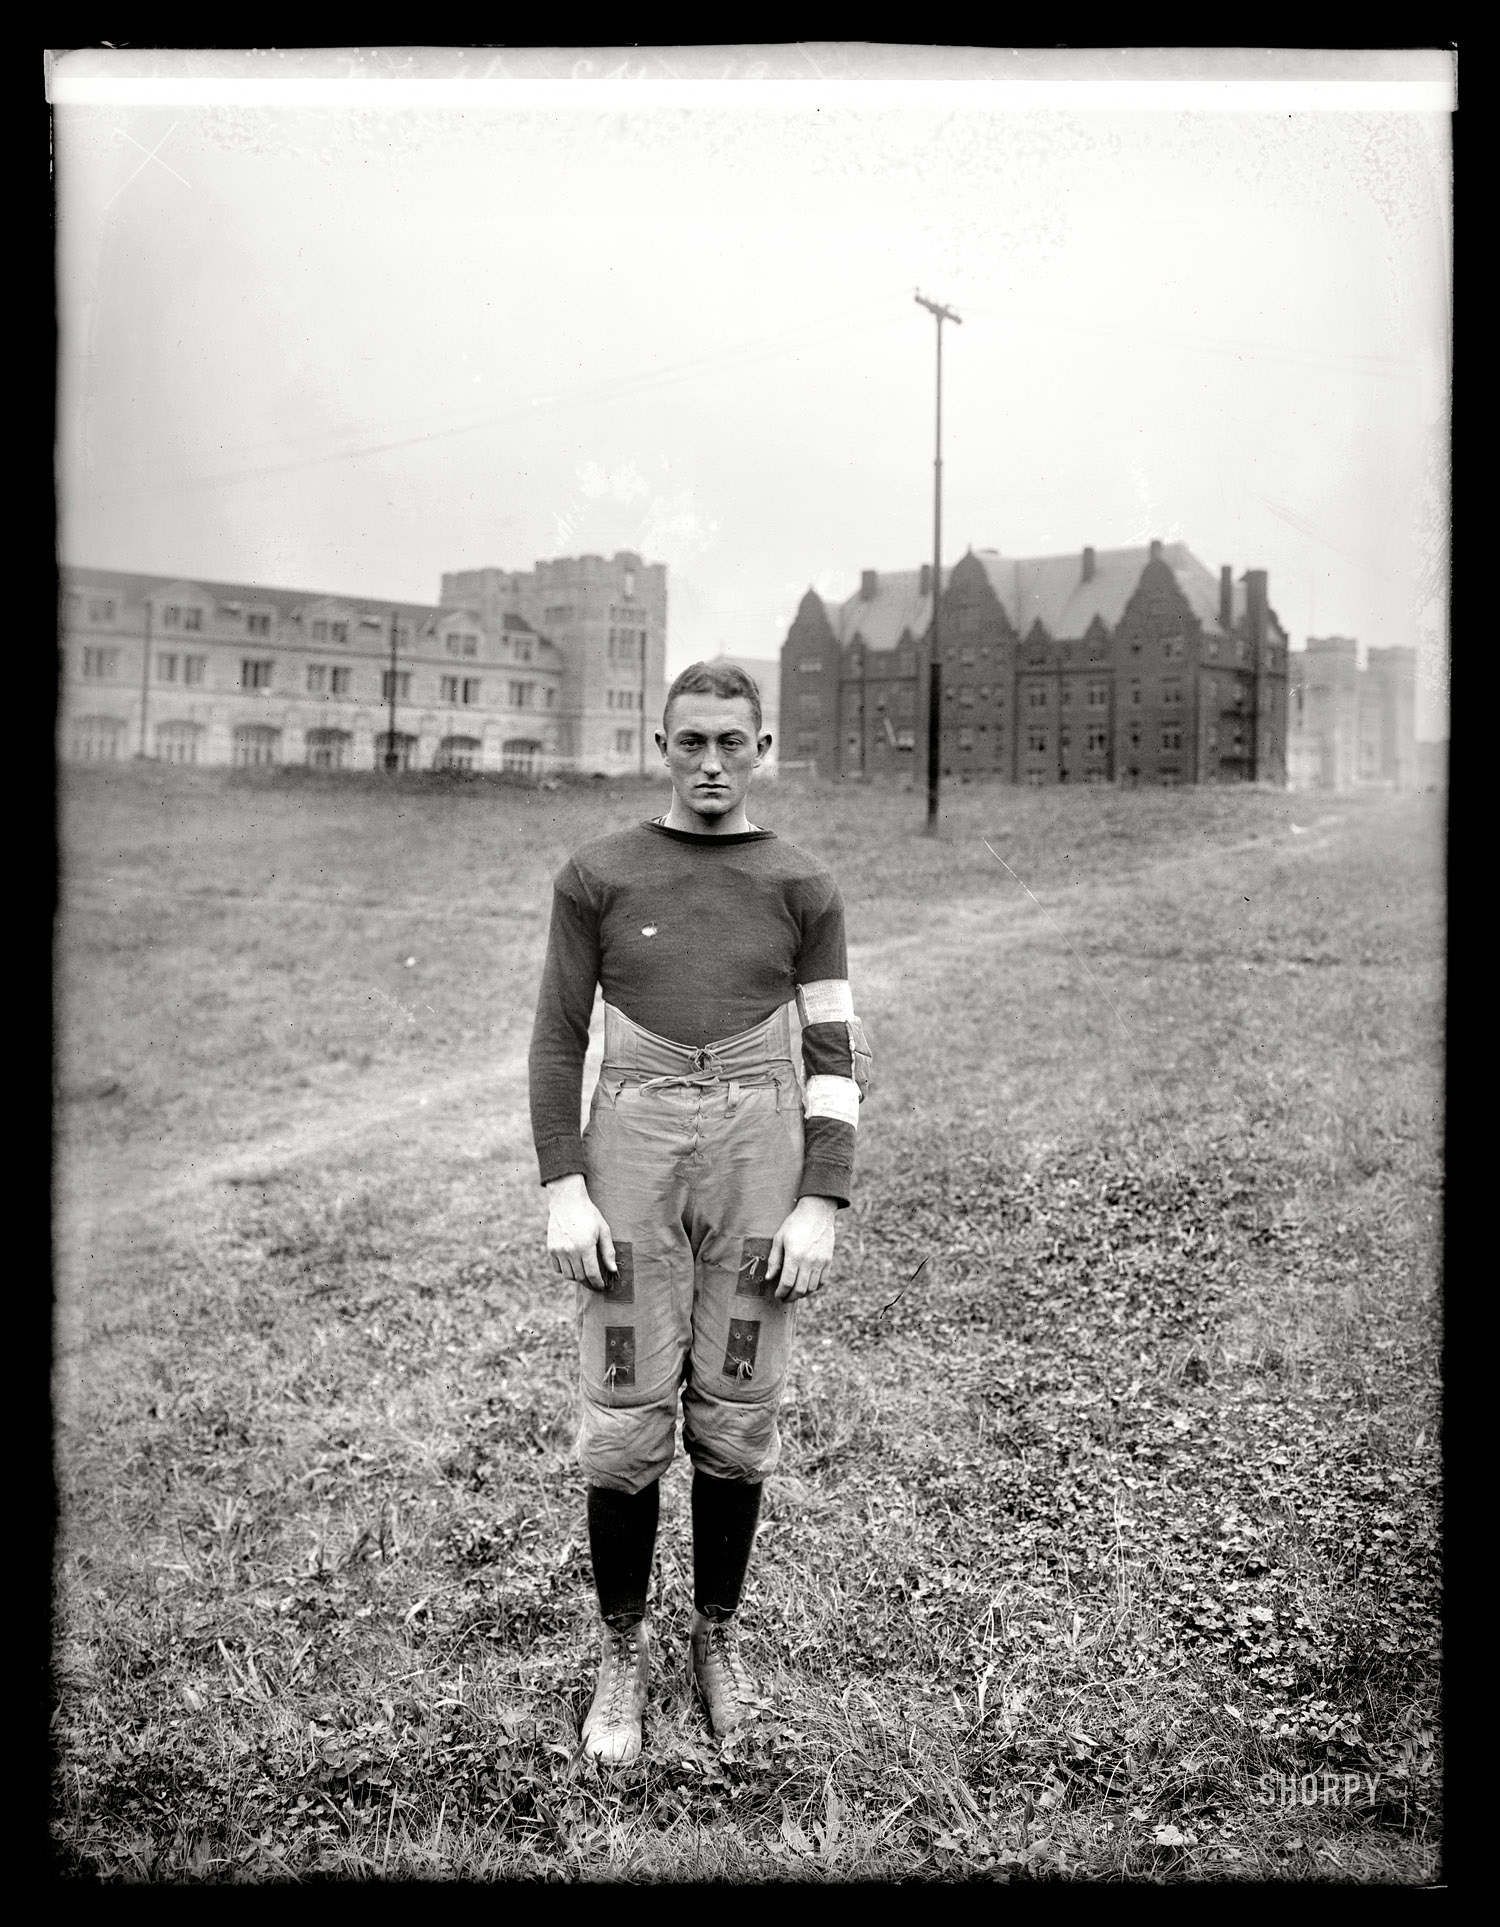 Washington, D.C. "F. Murphy, Catholic University, 1920." Outstanding in his field. National Photo Company Collection glass negative. View full size.